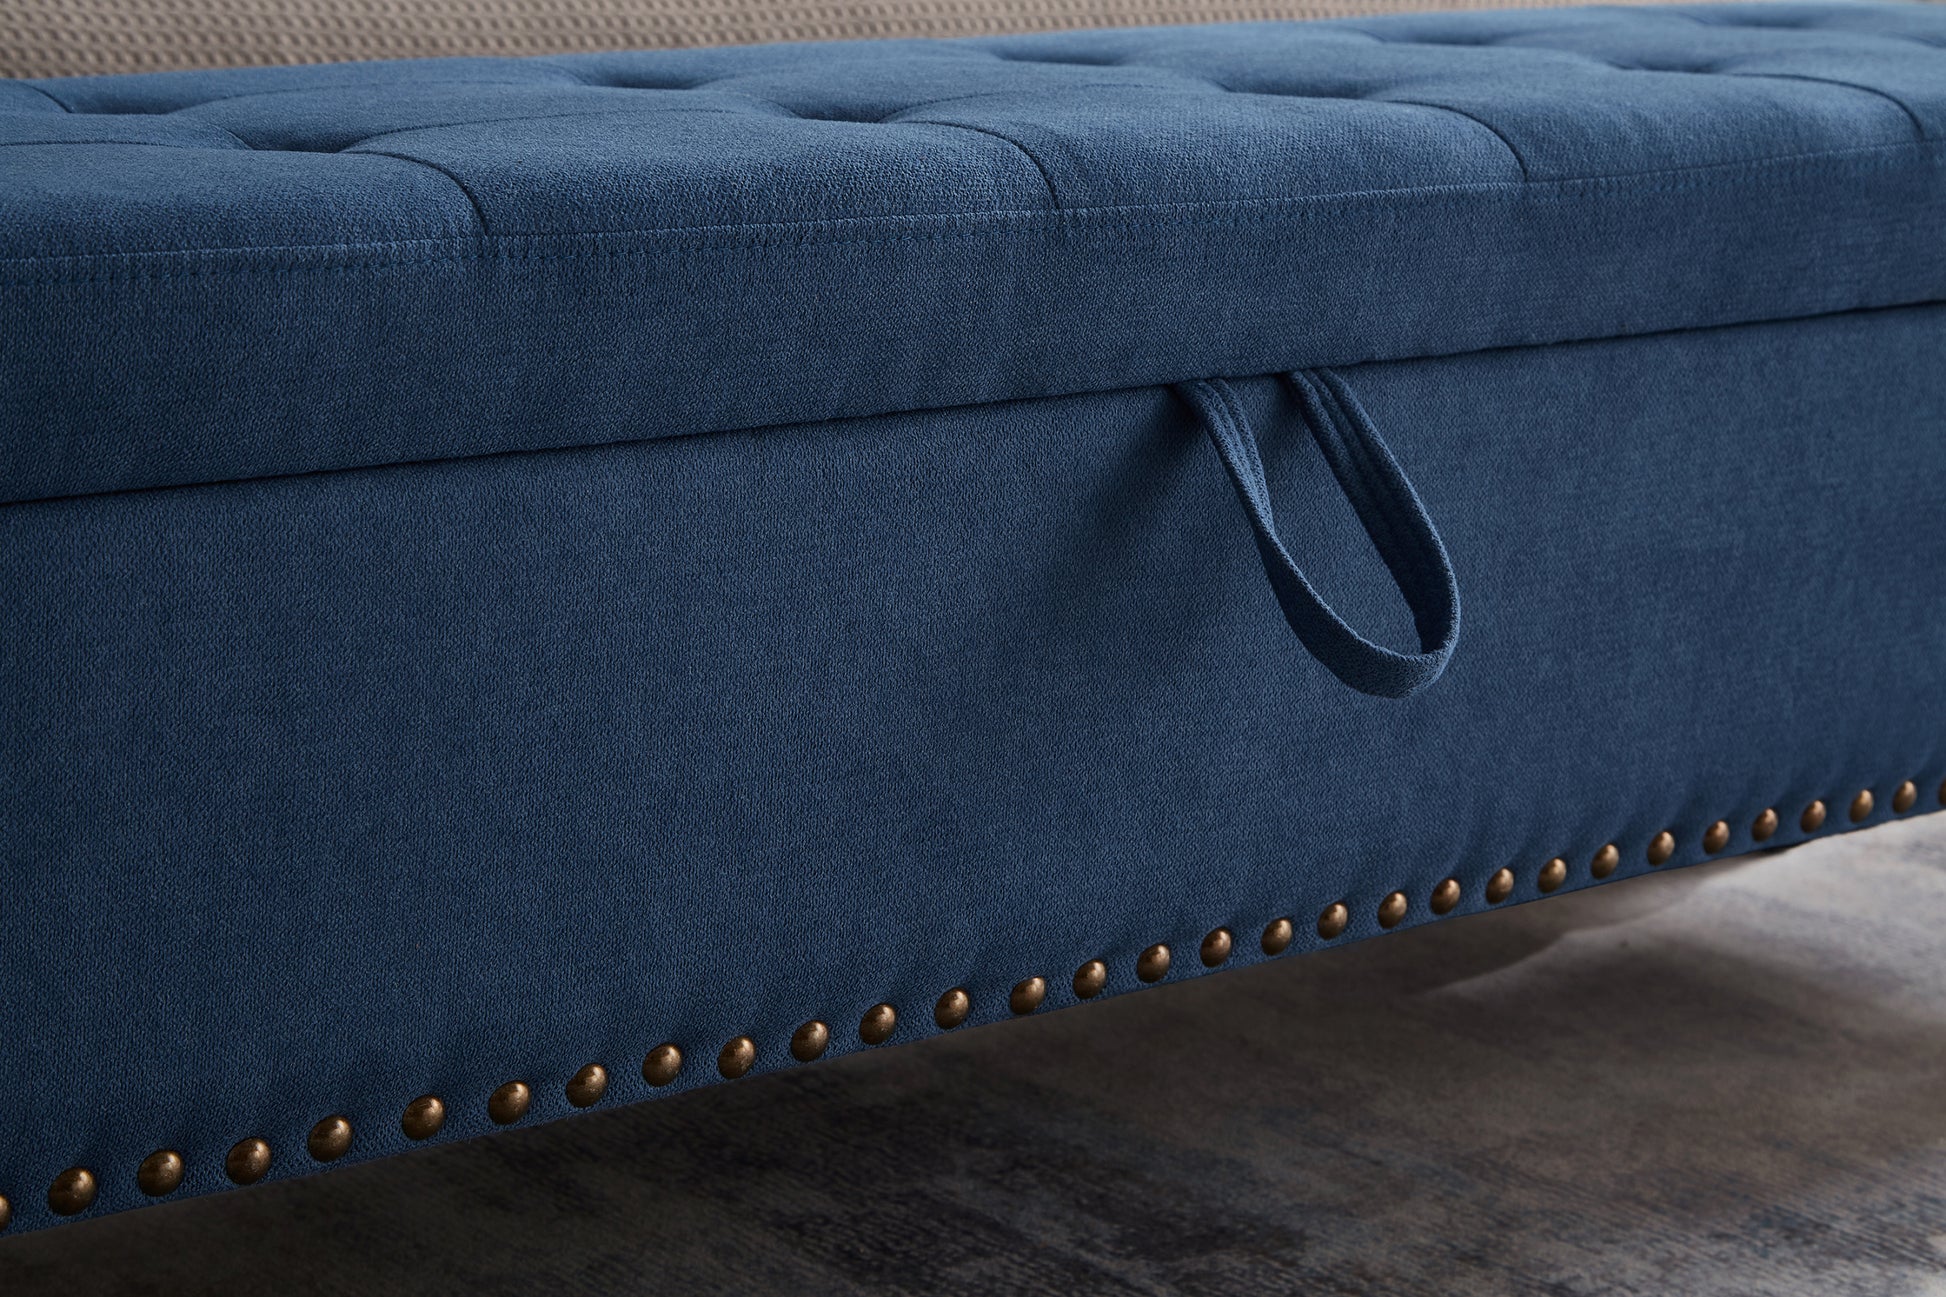 59" Bed Bench with Storage Blue Fabric blue-foam-cotton linen